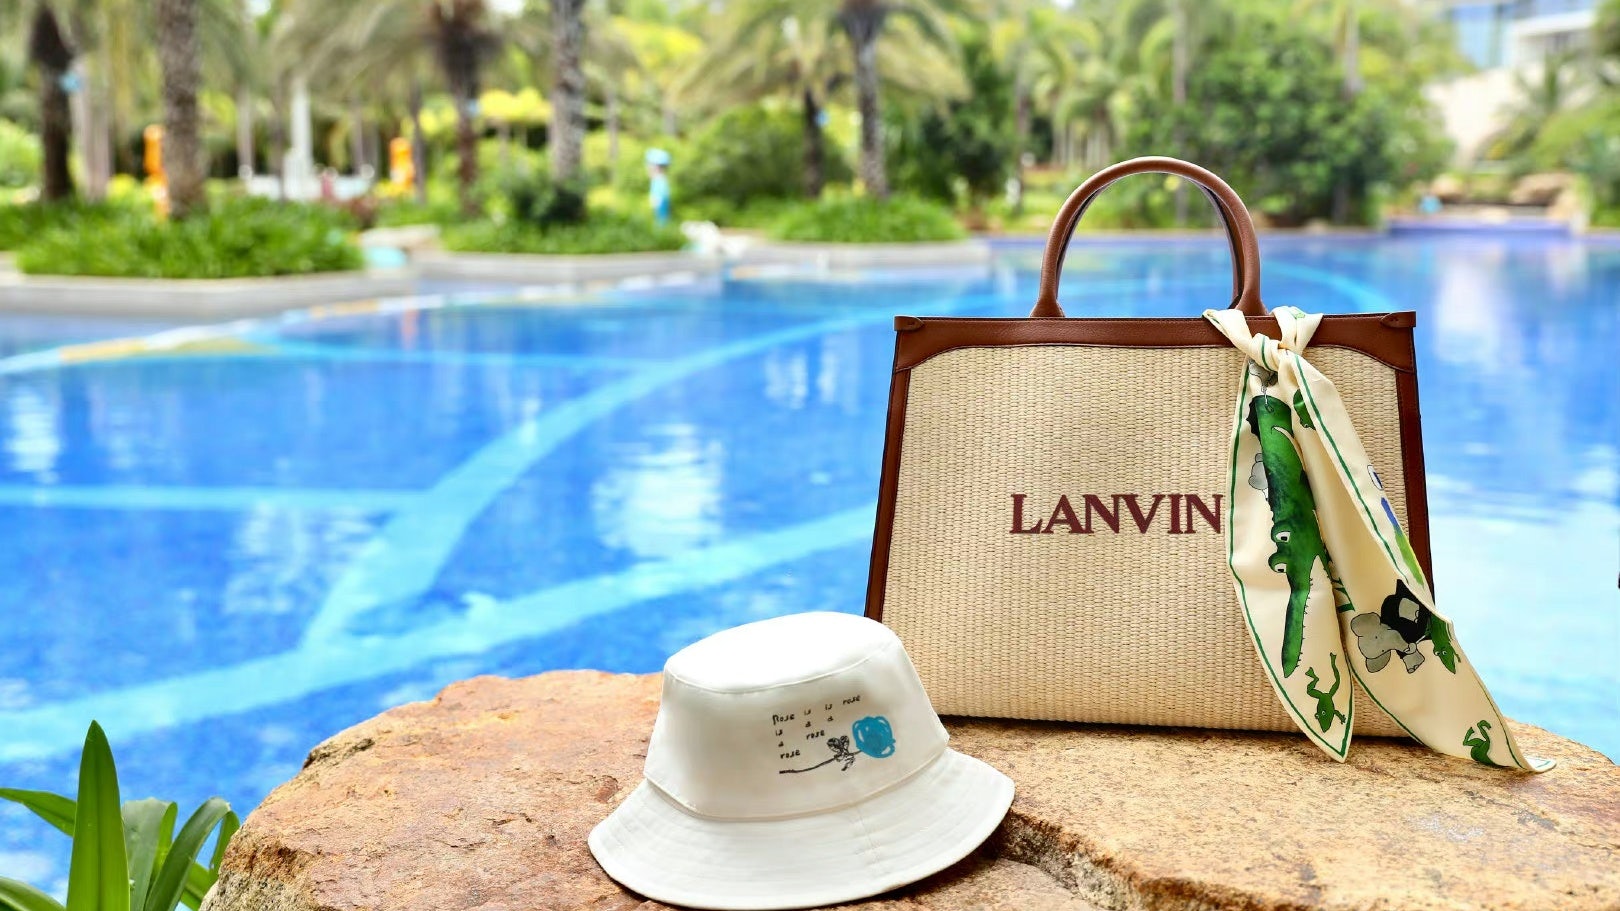 A COVID-19 outbreak on Hainan has left 80,000 tourists stuck in lockdown. Will this put a dent in the economic potential of the duty-free island? Photo: Lanvin pop-up in Sanya